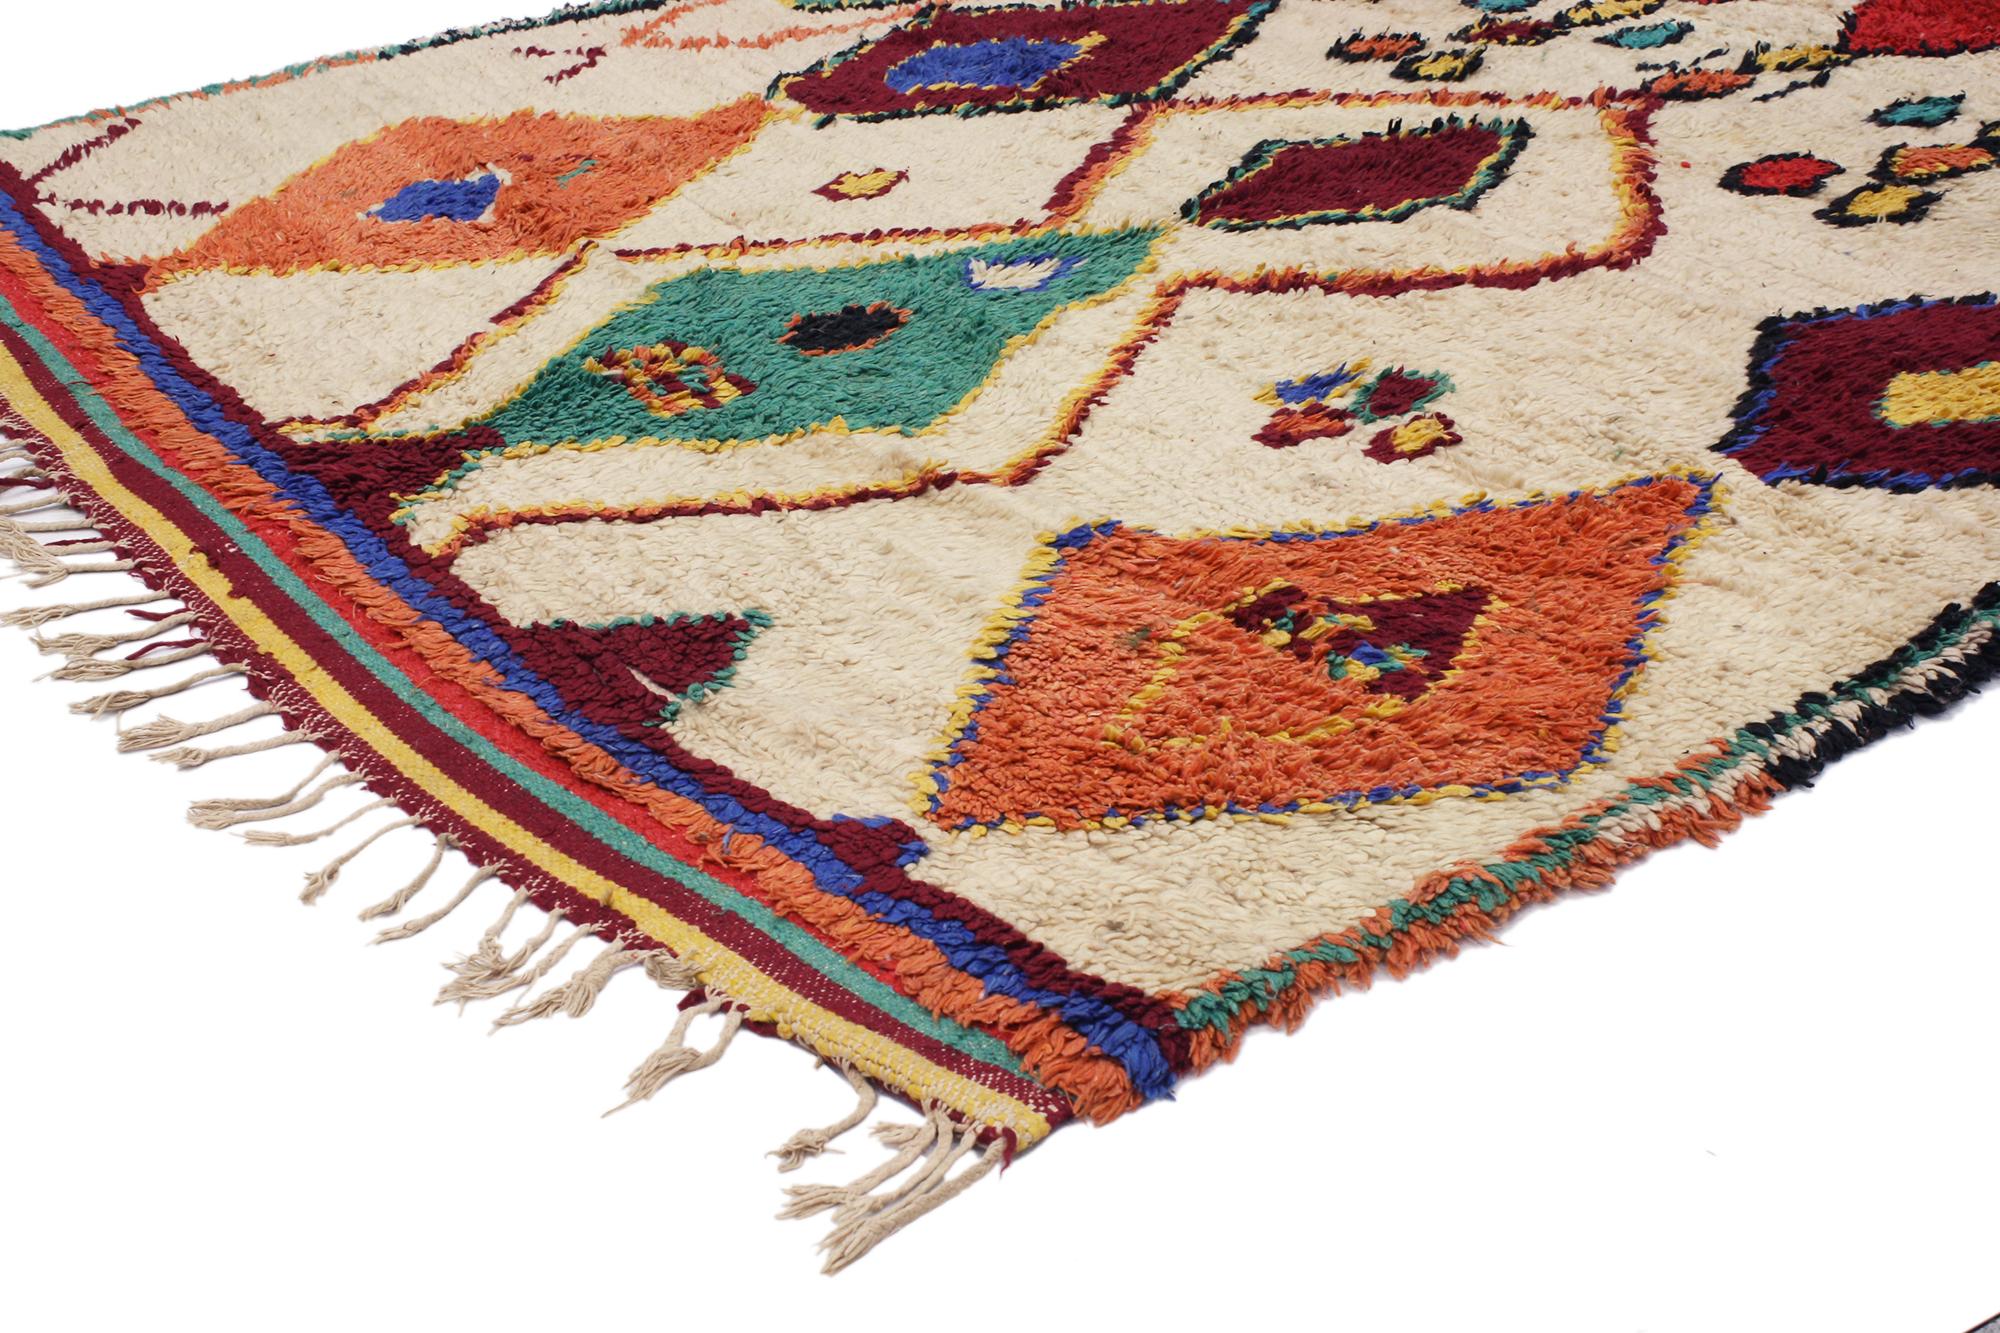 20374 Vintage Berber Moroccan Azilal Rug, 05'00 x 06'09. Enter the captivating world of Azilal rugs, where each fiber intricately weaves a narrative, carefully crafted by skilled artisans amidst the vibrant landscapes of central Morocco and the